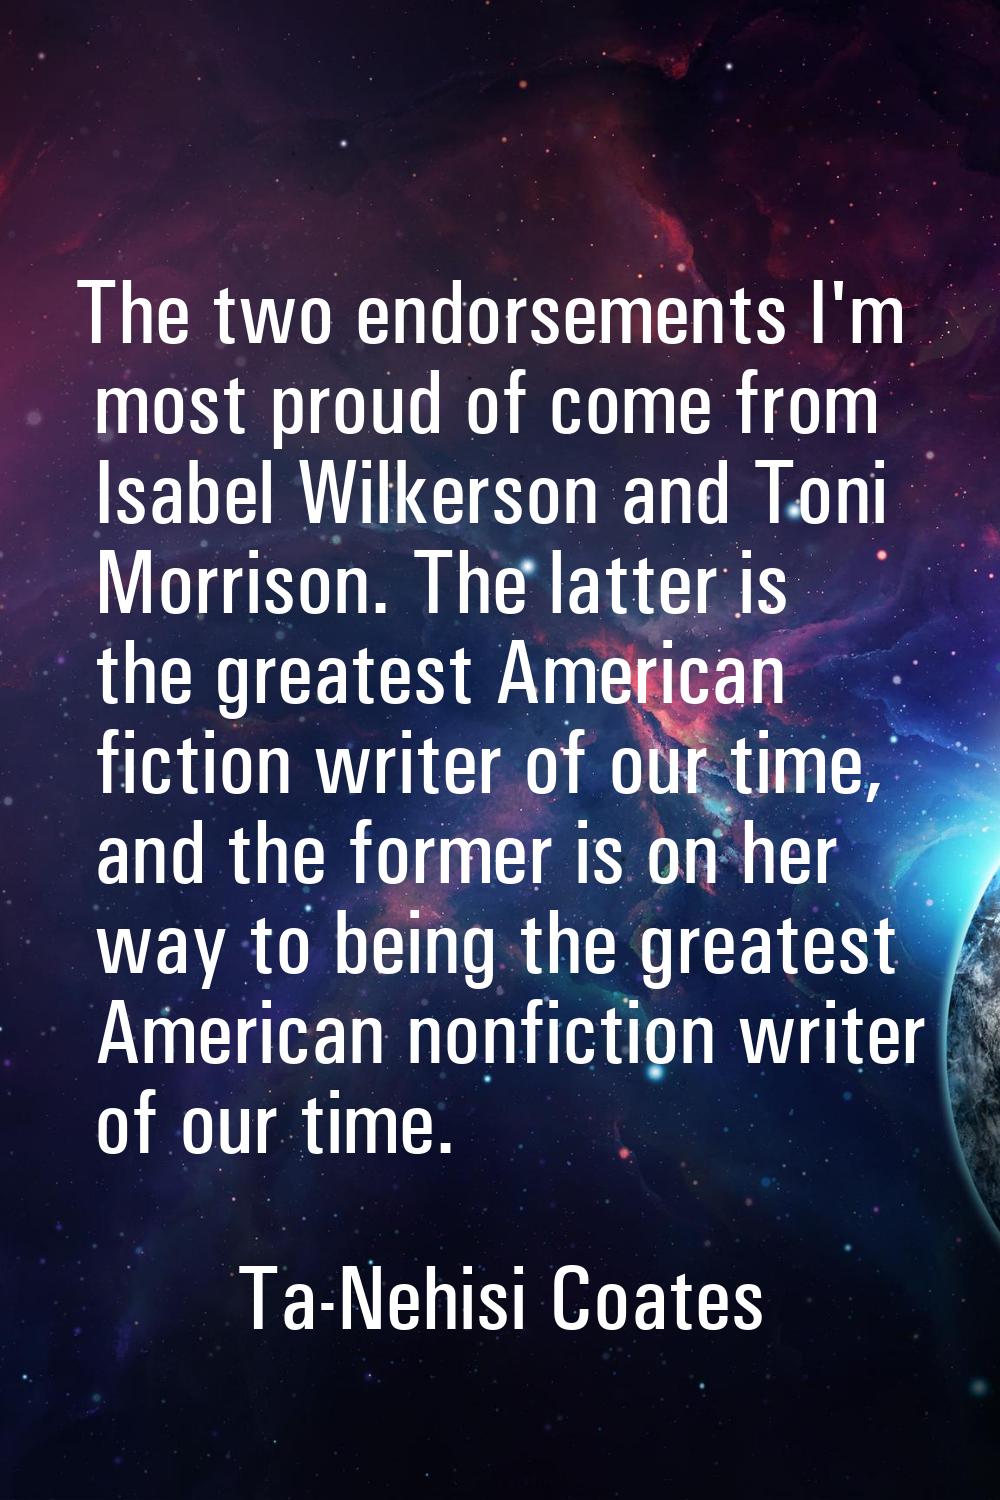 The two endorsements I'm most proud of come from Isabel Wilkerson and Toni Morrison. The latter is 